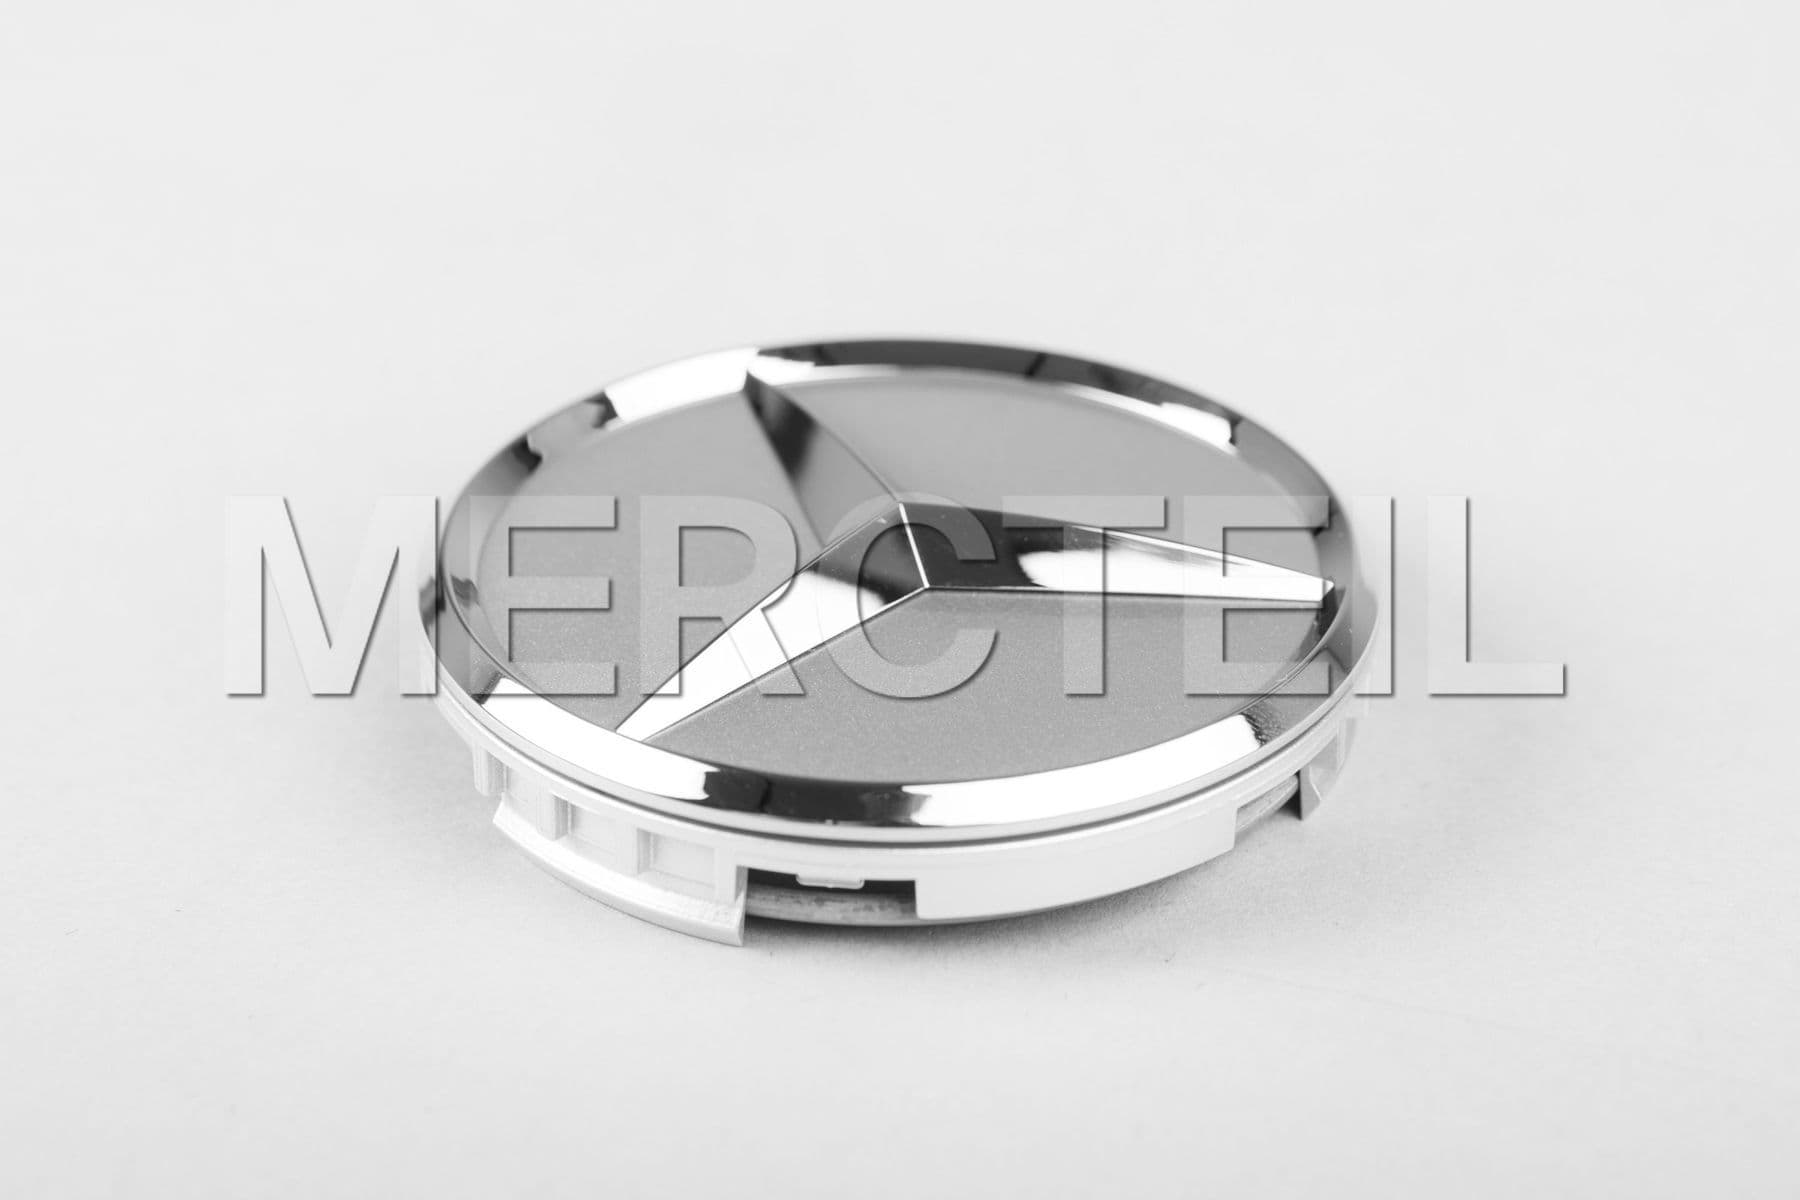 Buy the spare part Mercedes-Benz A22340160009715 wheel hub cover